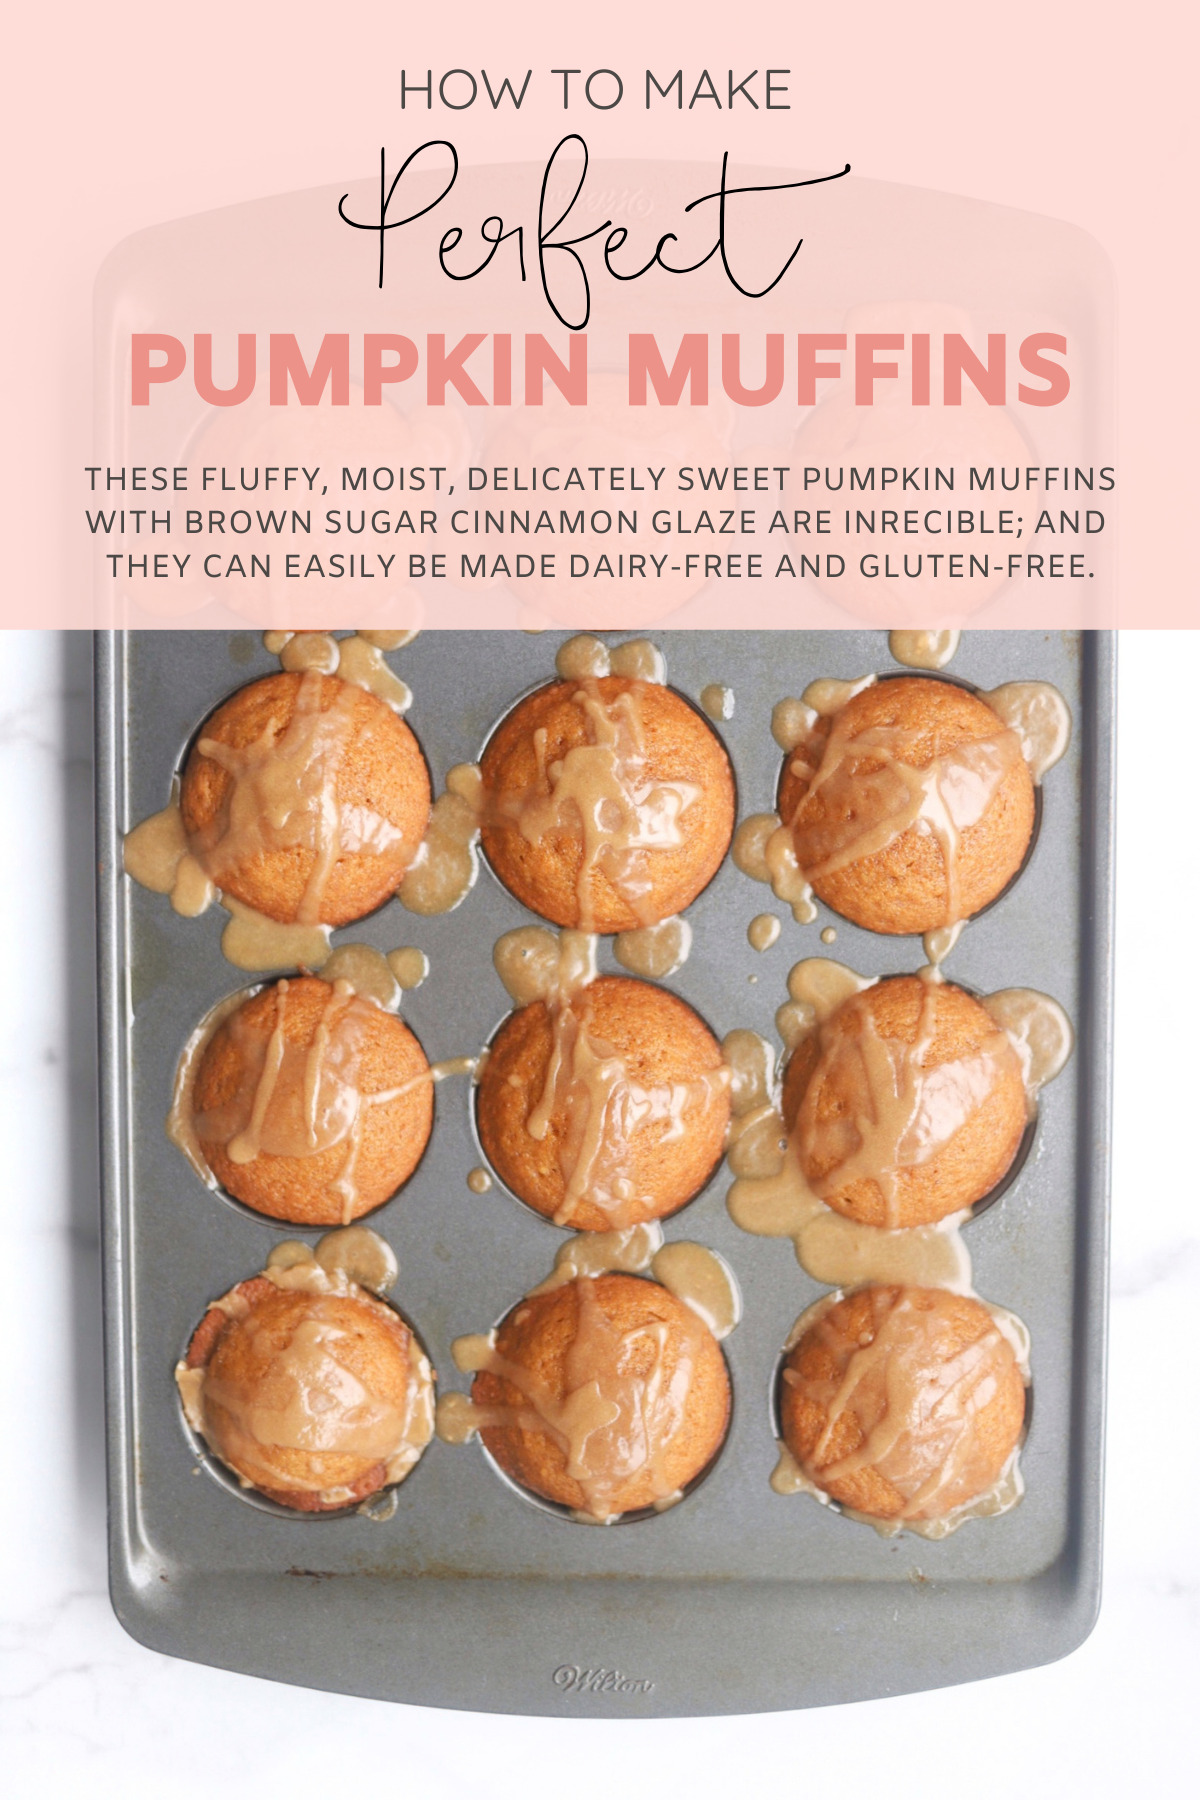 Say hello to the most incredible fluffy, moist, delicately sweet pumpkin muffins topped with my new favorite brown sugar cinnamon glaze. They can also easily be made dairy-free and gluten-free. | @glitterinclexi | GLITTERINC.COM